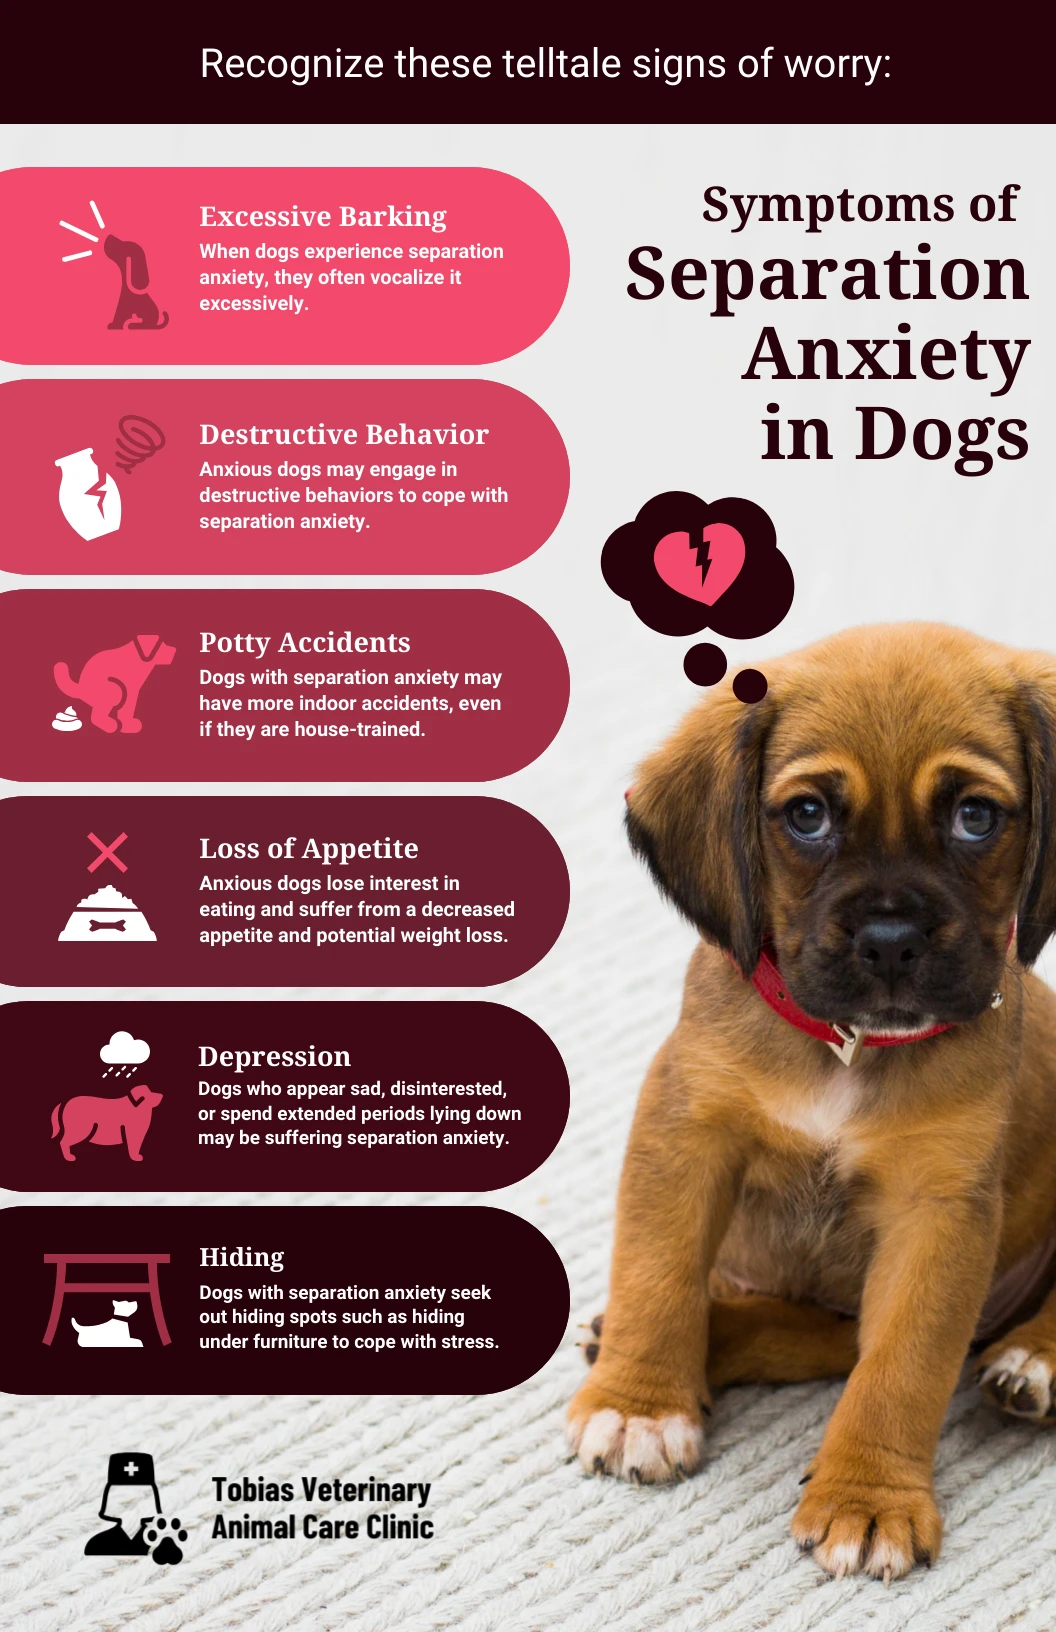 Treating Separation Anxiety in Dogs